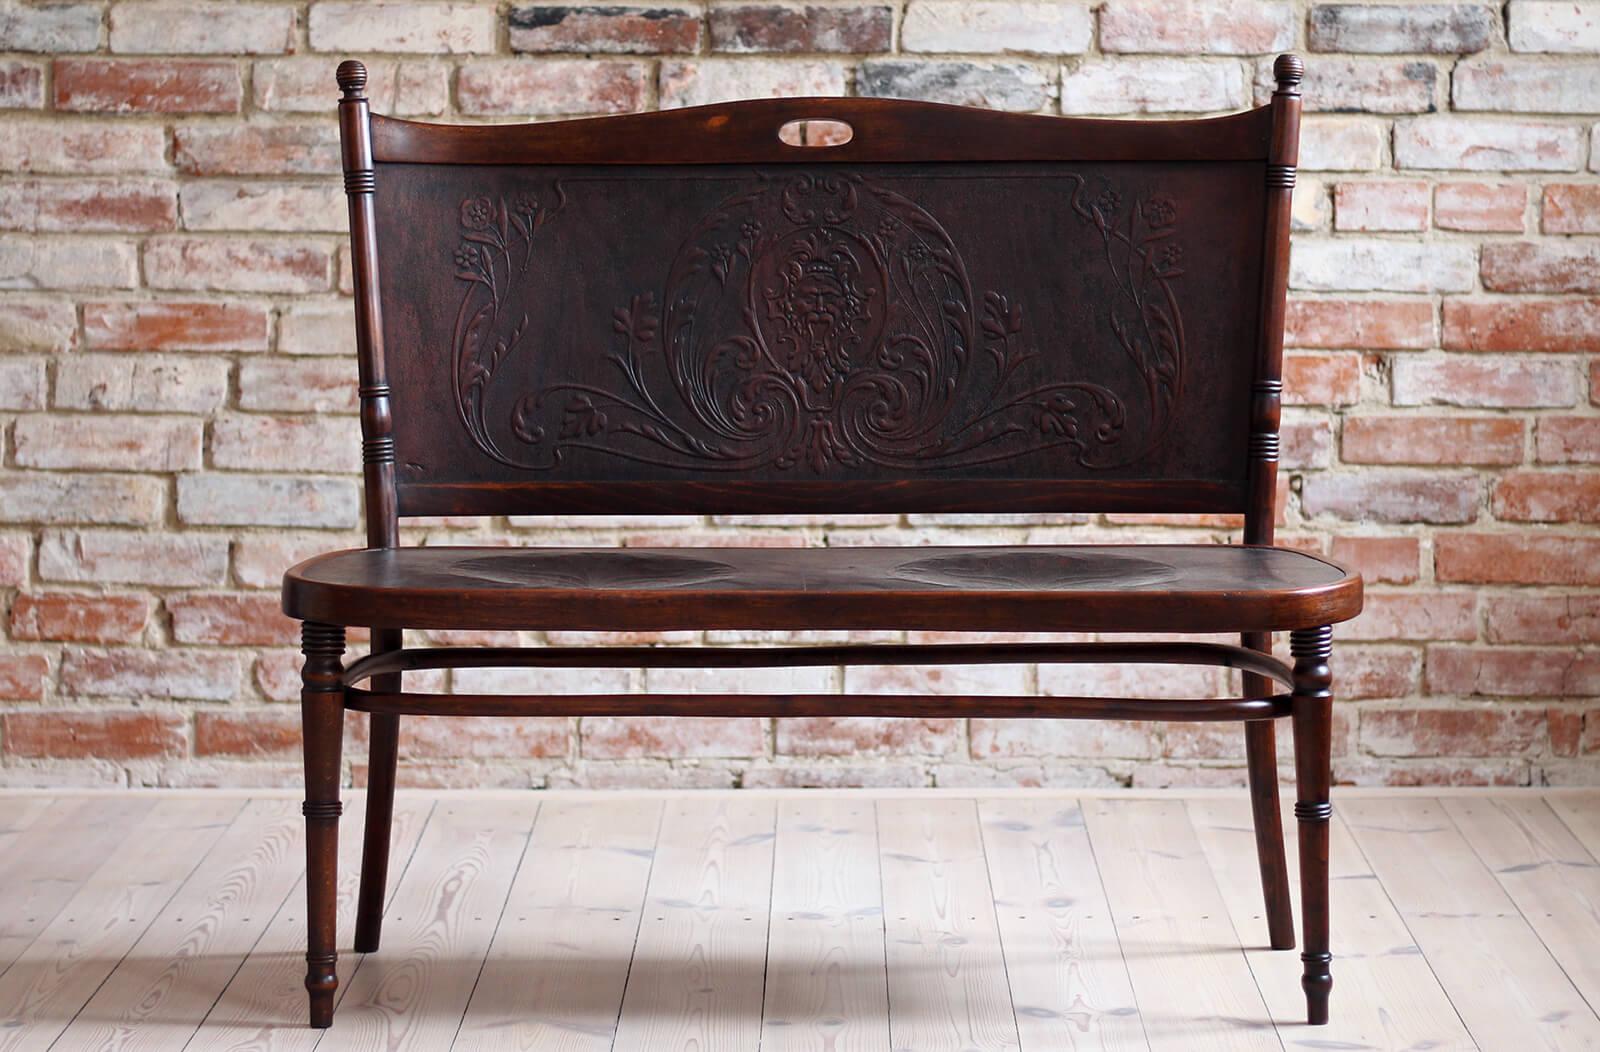 Beech Antique Bentwood Bench Attributed to Jacob and Josef Kohn, Early 20th Century For Sale